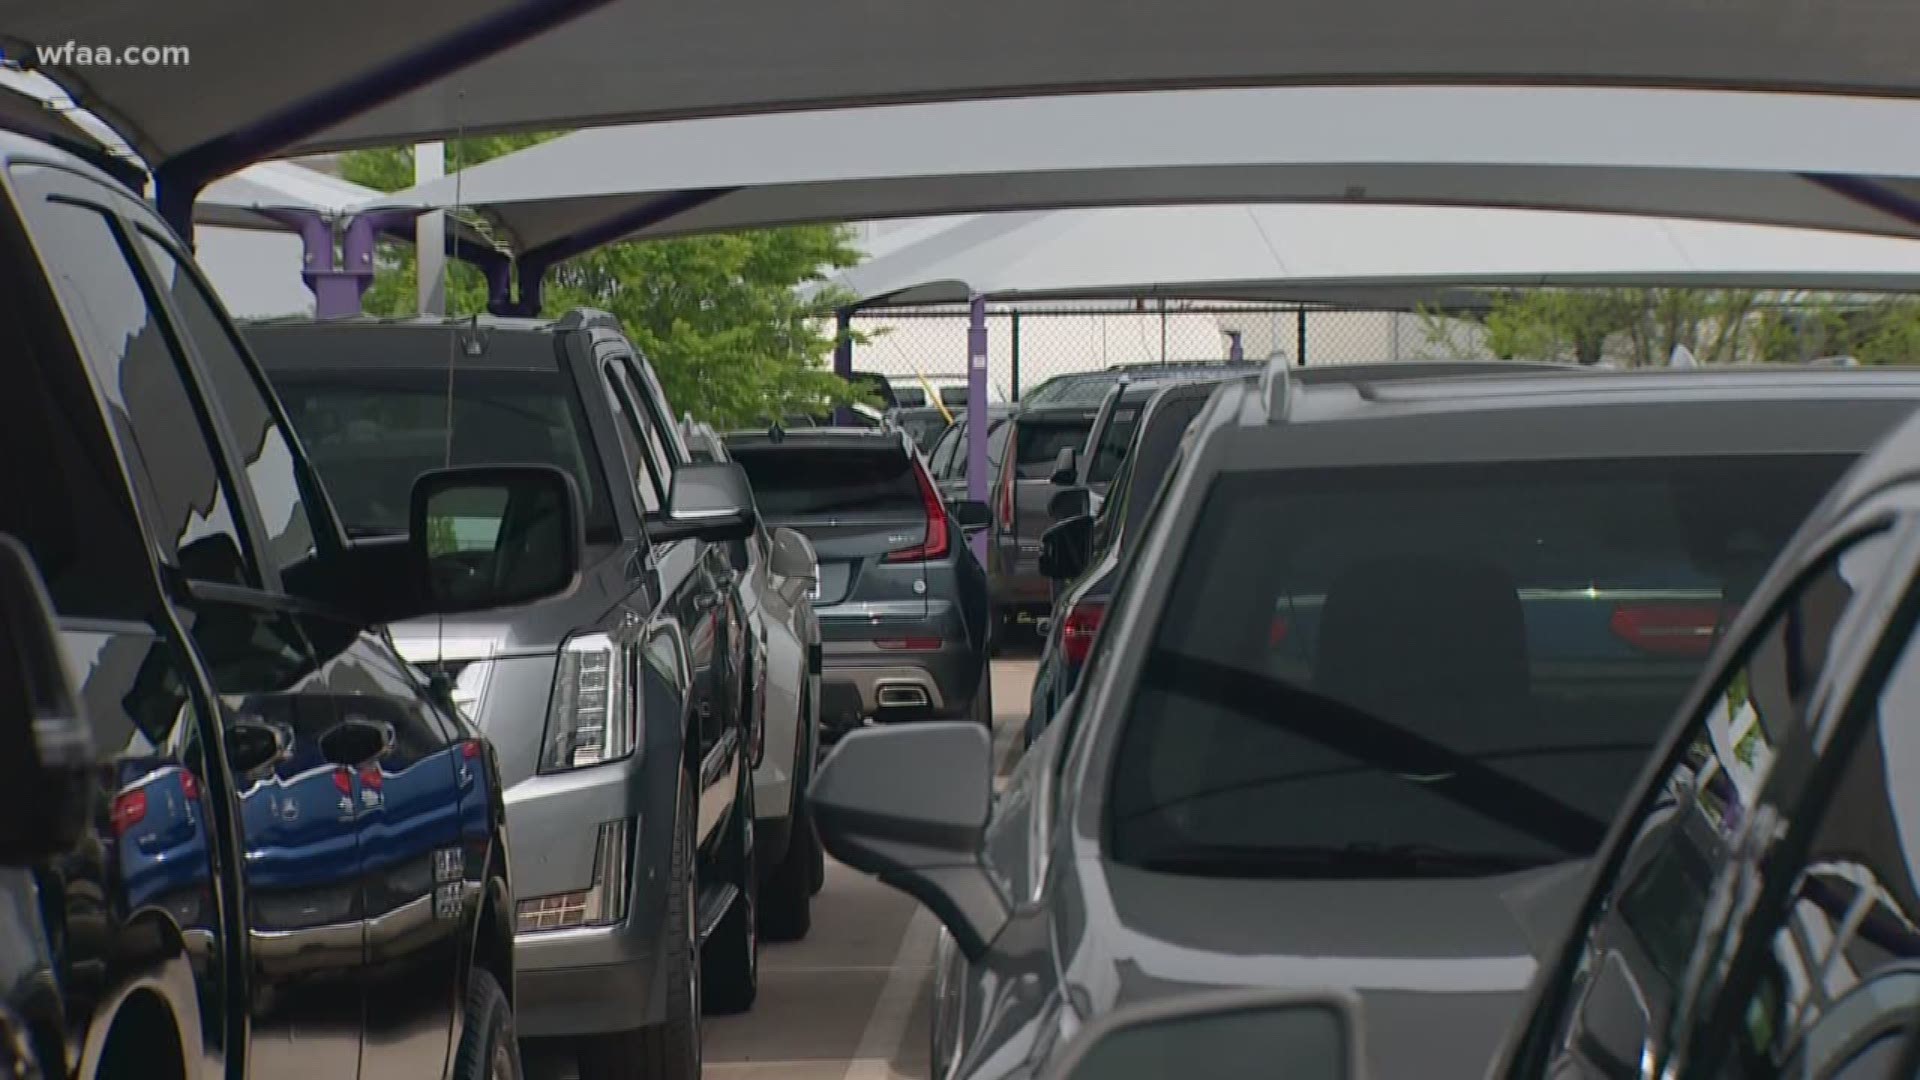 Starting Tuesday afternoon, every car in the dealership will be under tents.